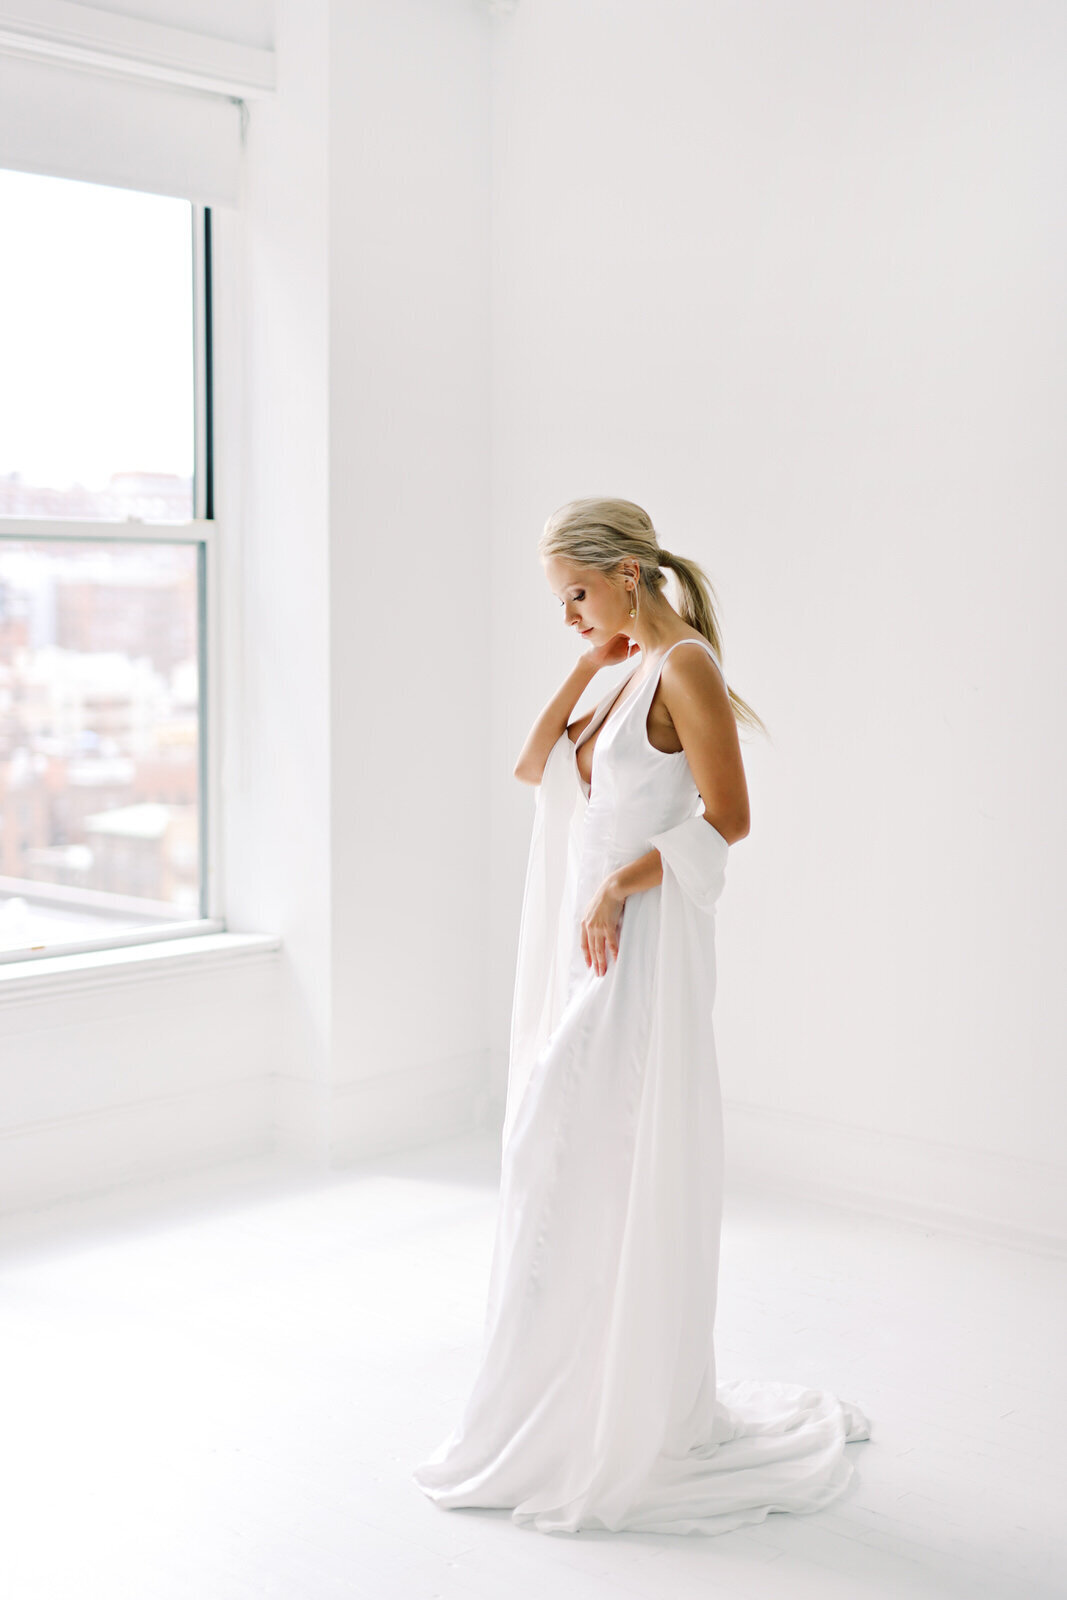 Stylish Bridal Editorial Photography for a New York City Brand 27